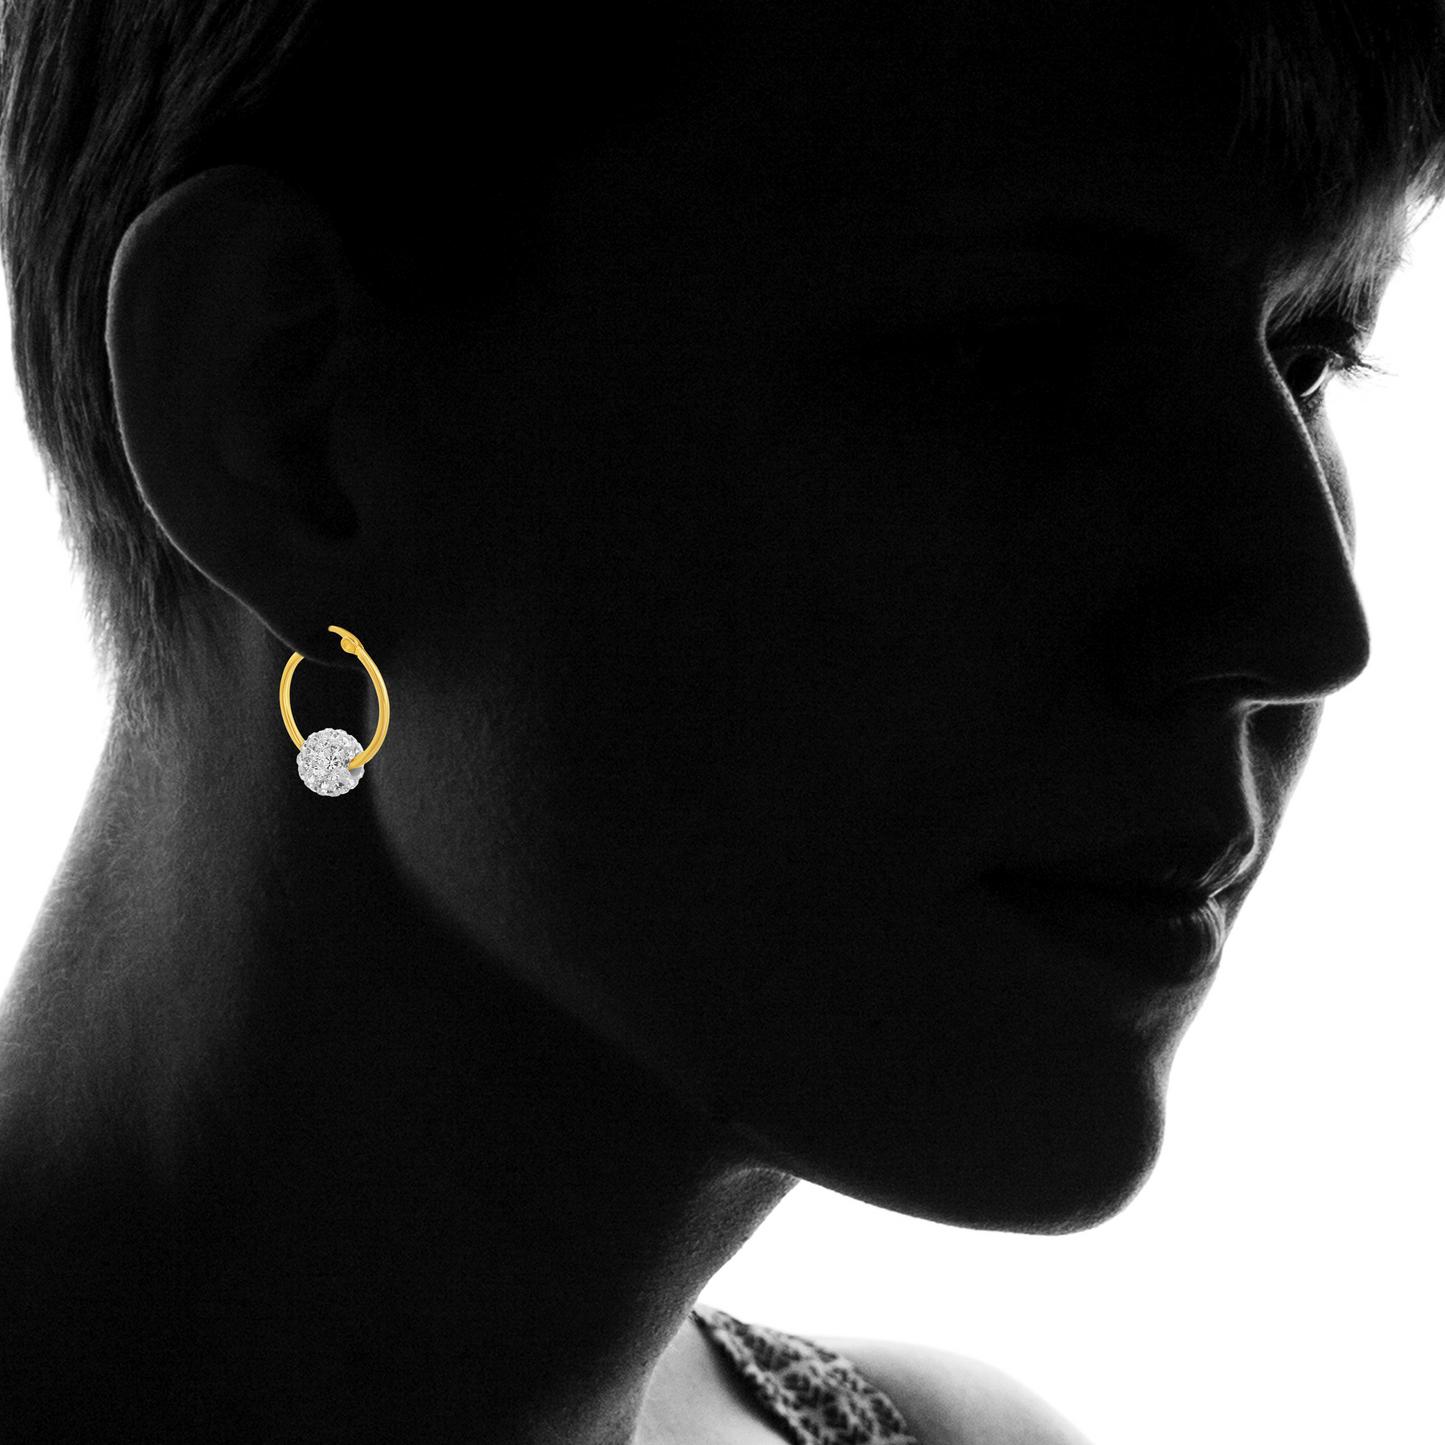 Teens' and Mothers' Earrings:  Gold IP Steel Hoops with Floating Crystal Balls